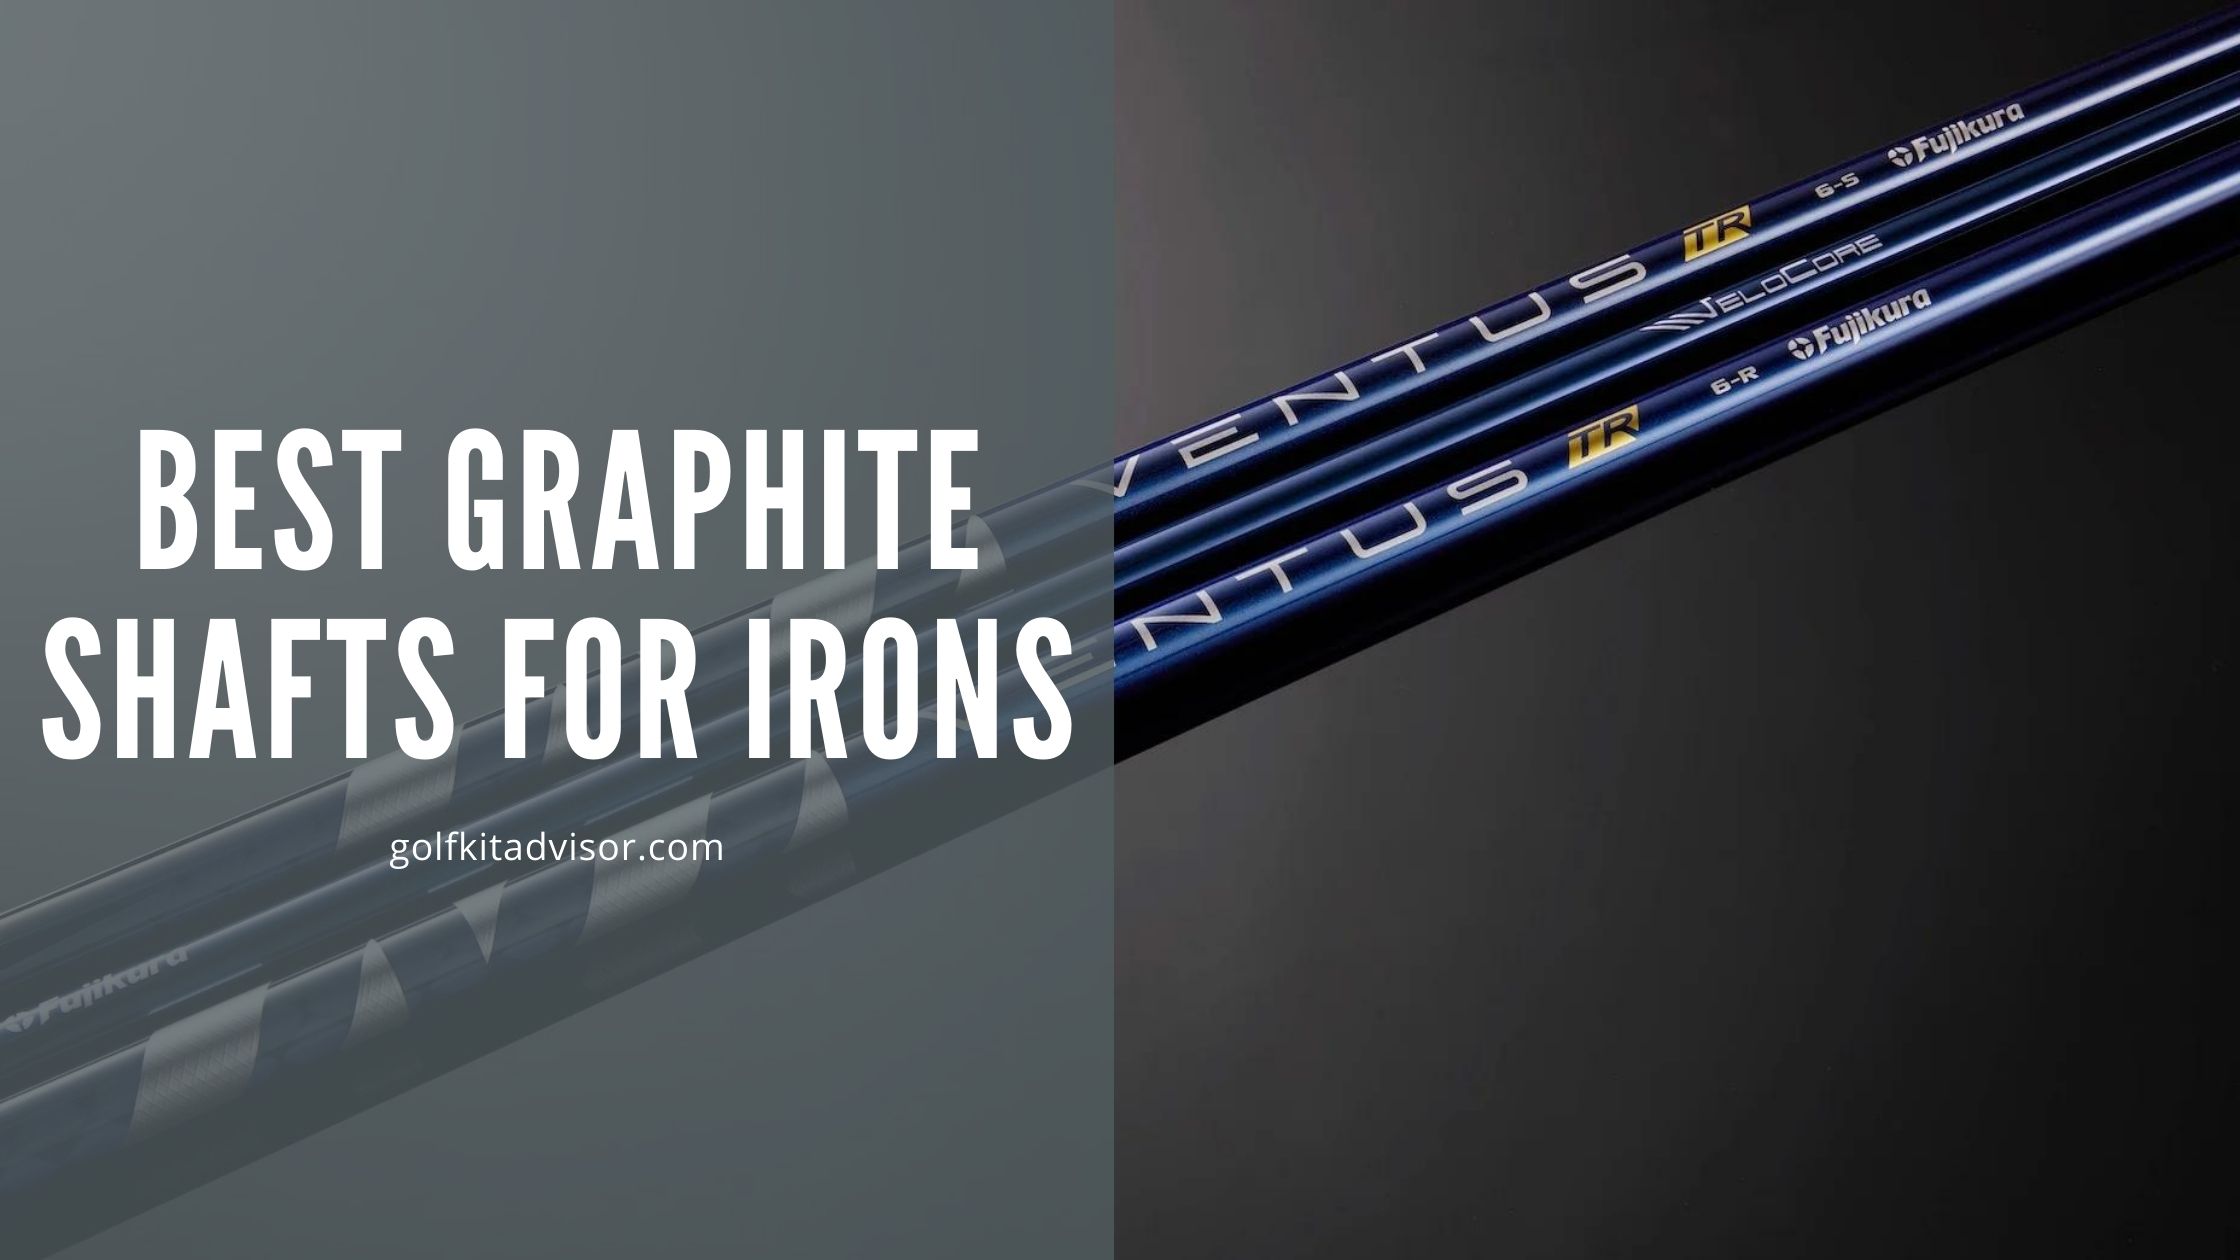 Best Graphite Shafts for Irons